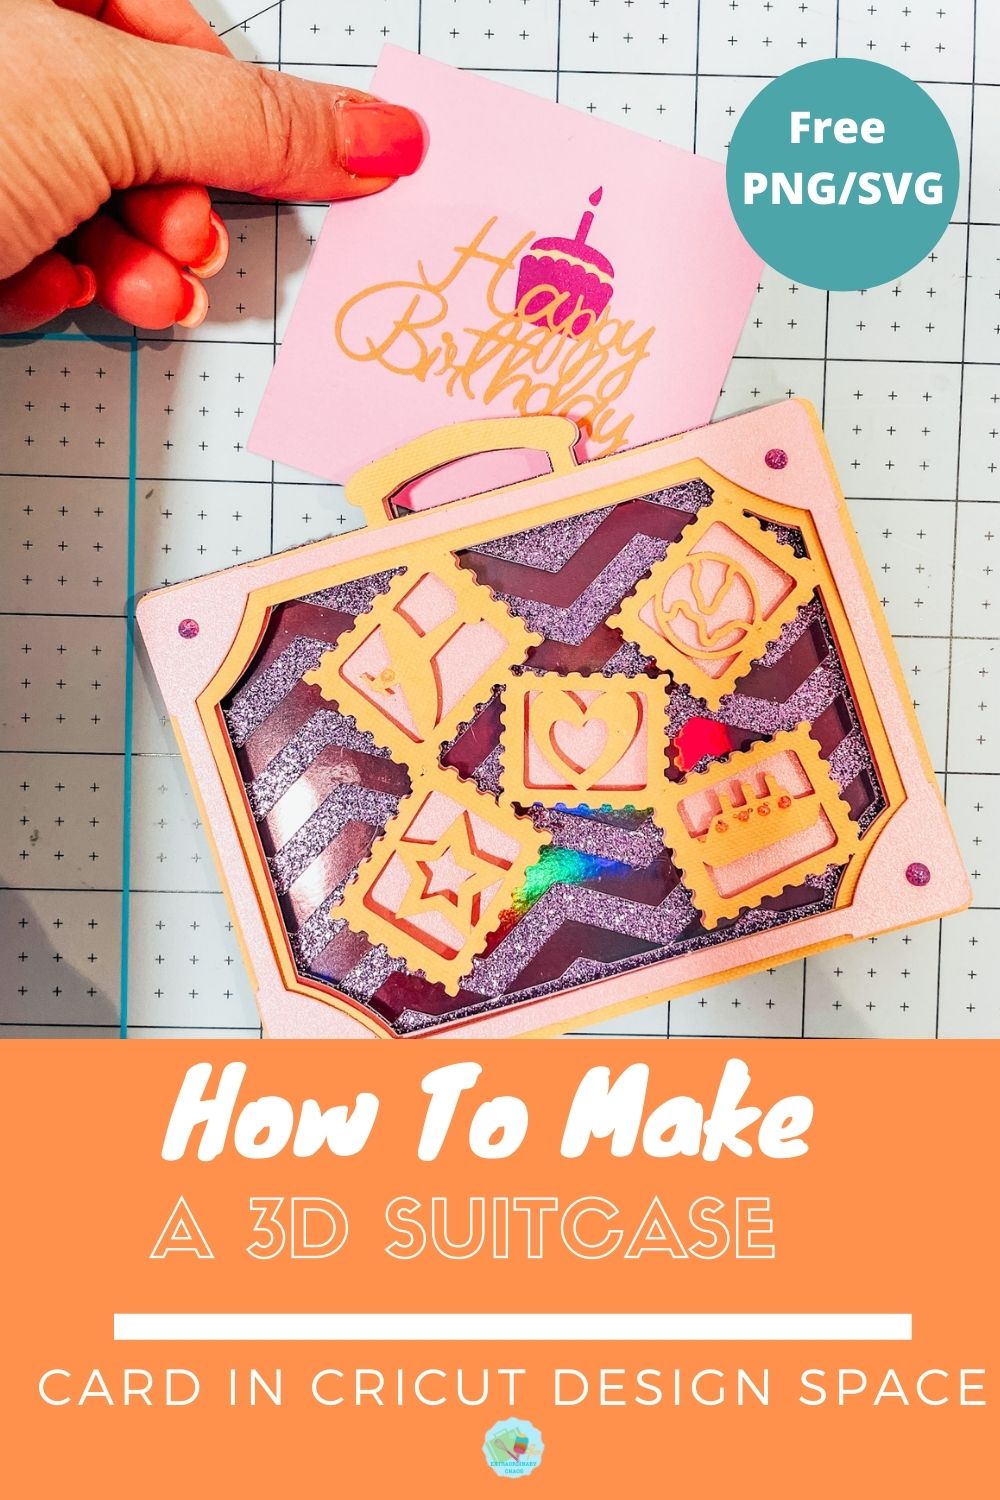 How to make a 3d suitcase card in Cricut Design Space and Free SVG PNG tutorial -2